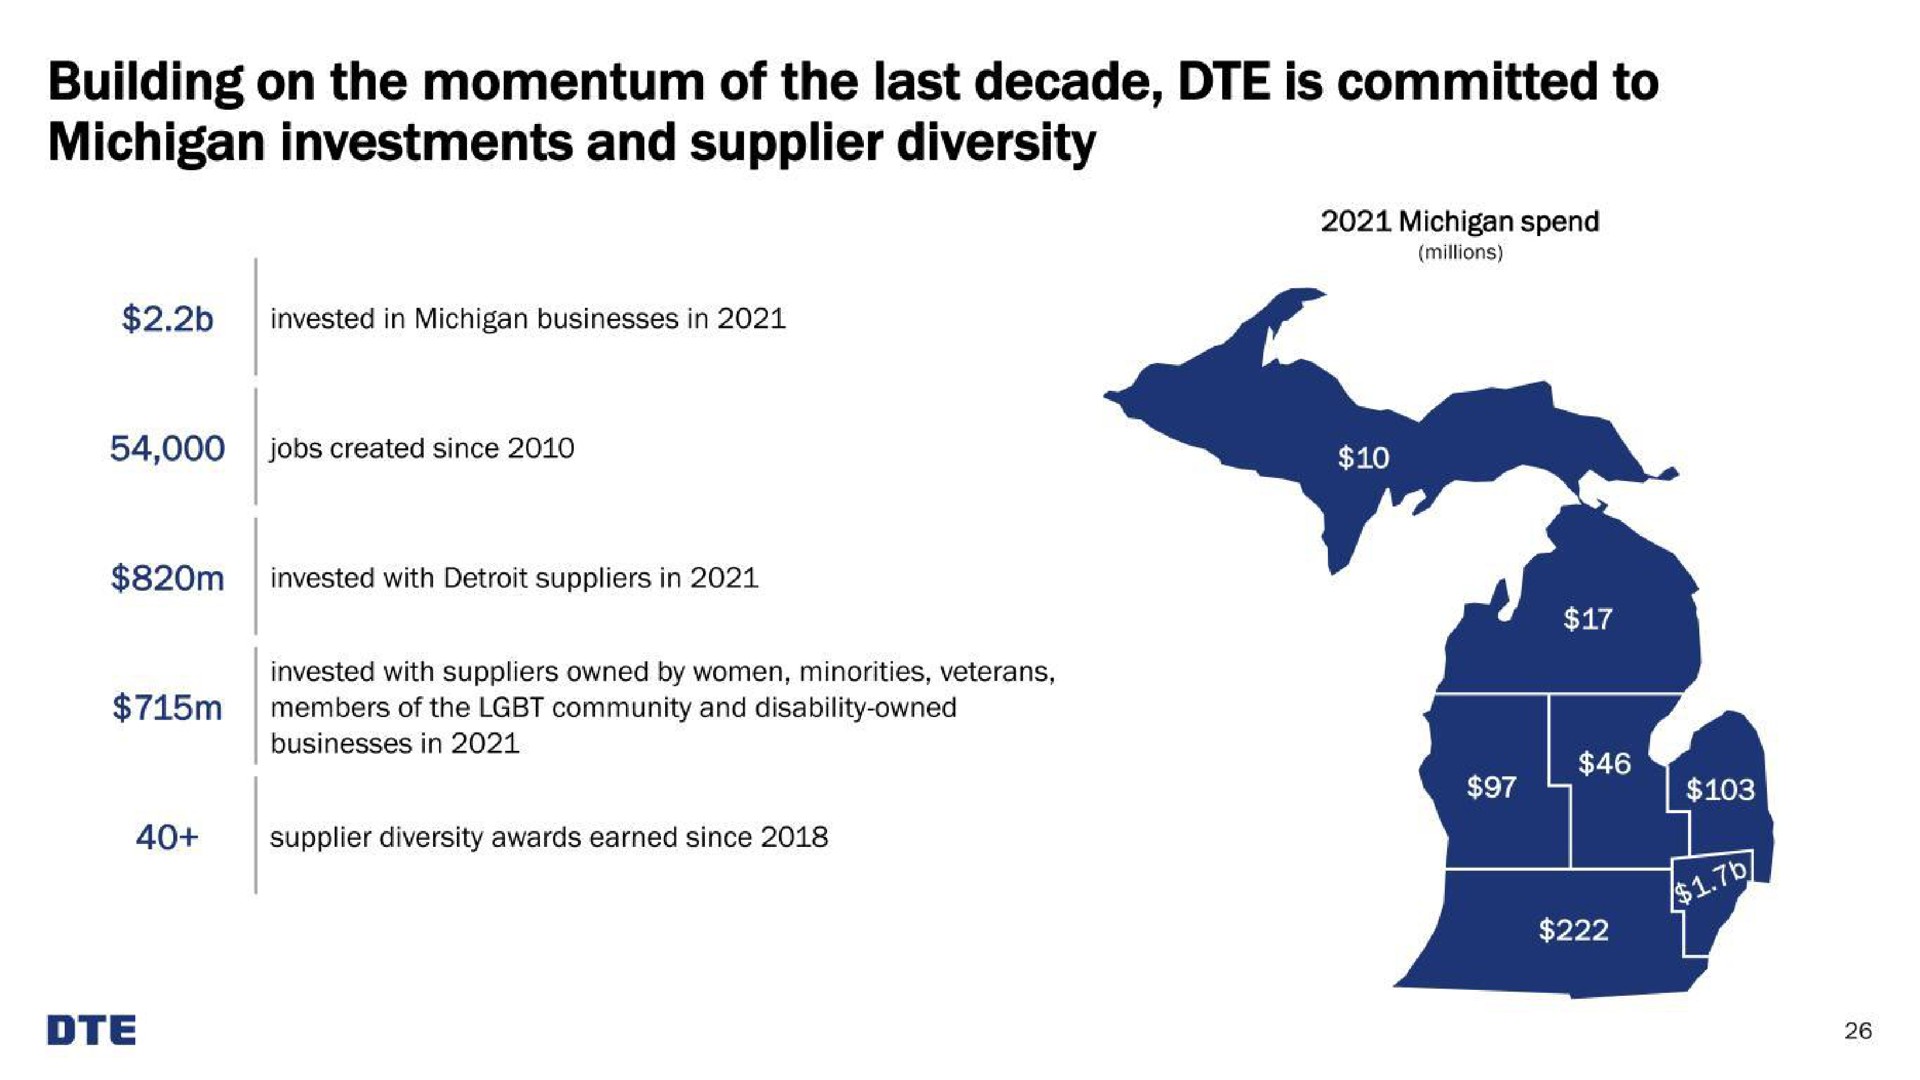 building on the momentum of the last decade is committed to michigan investments and supplier diversity | DTE Electric